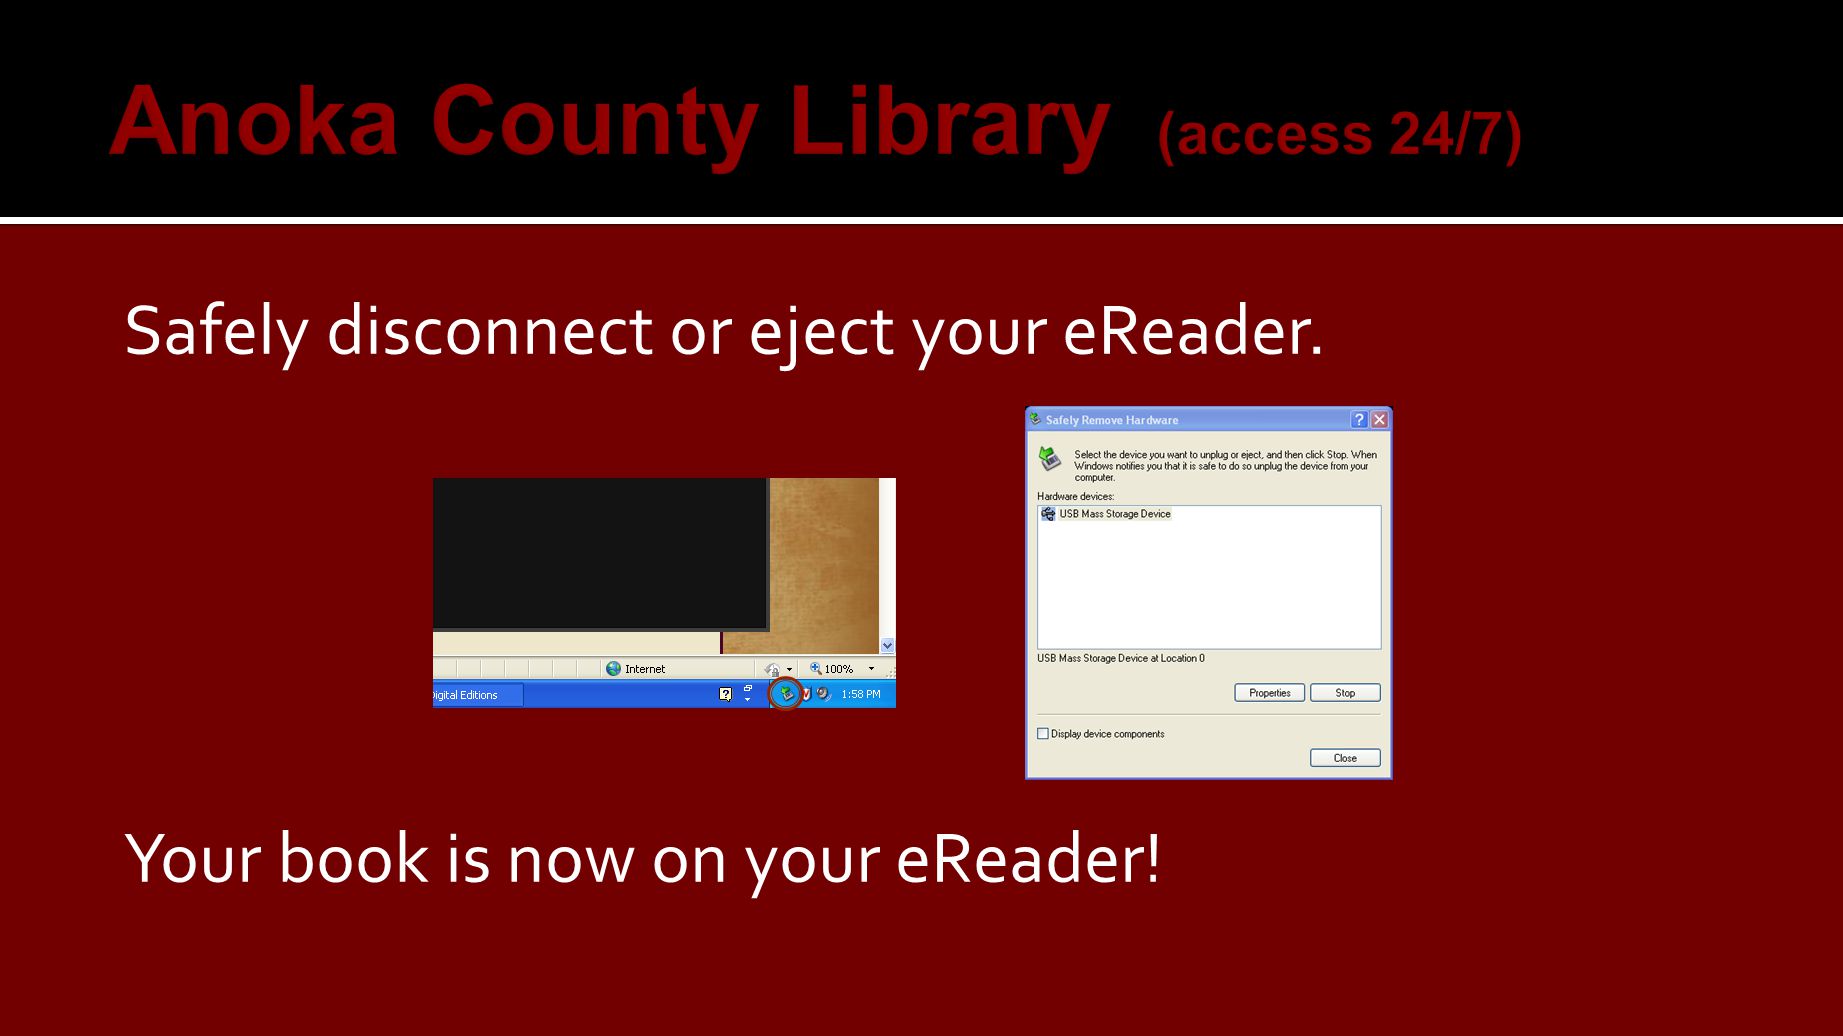 Safely disconnect or eject your eReader. Your book is now on your eReader!